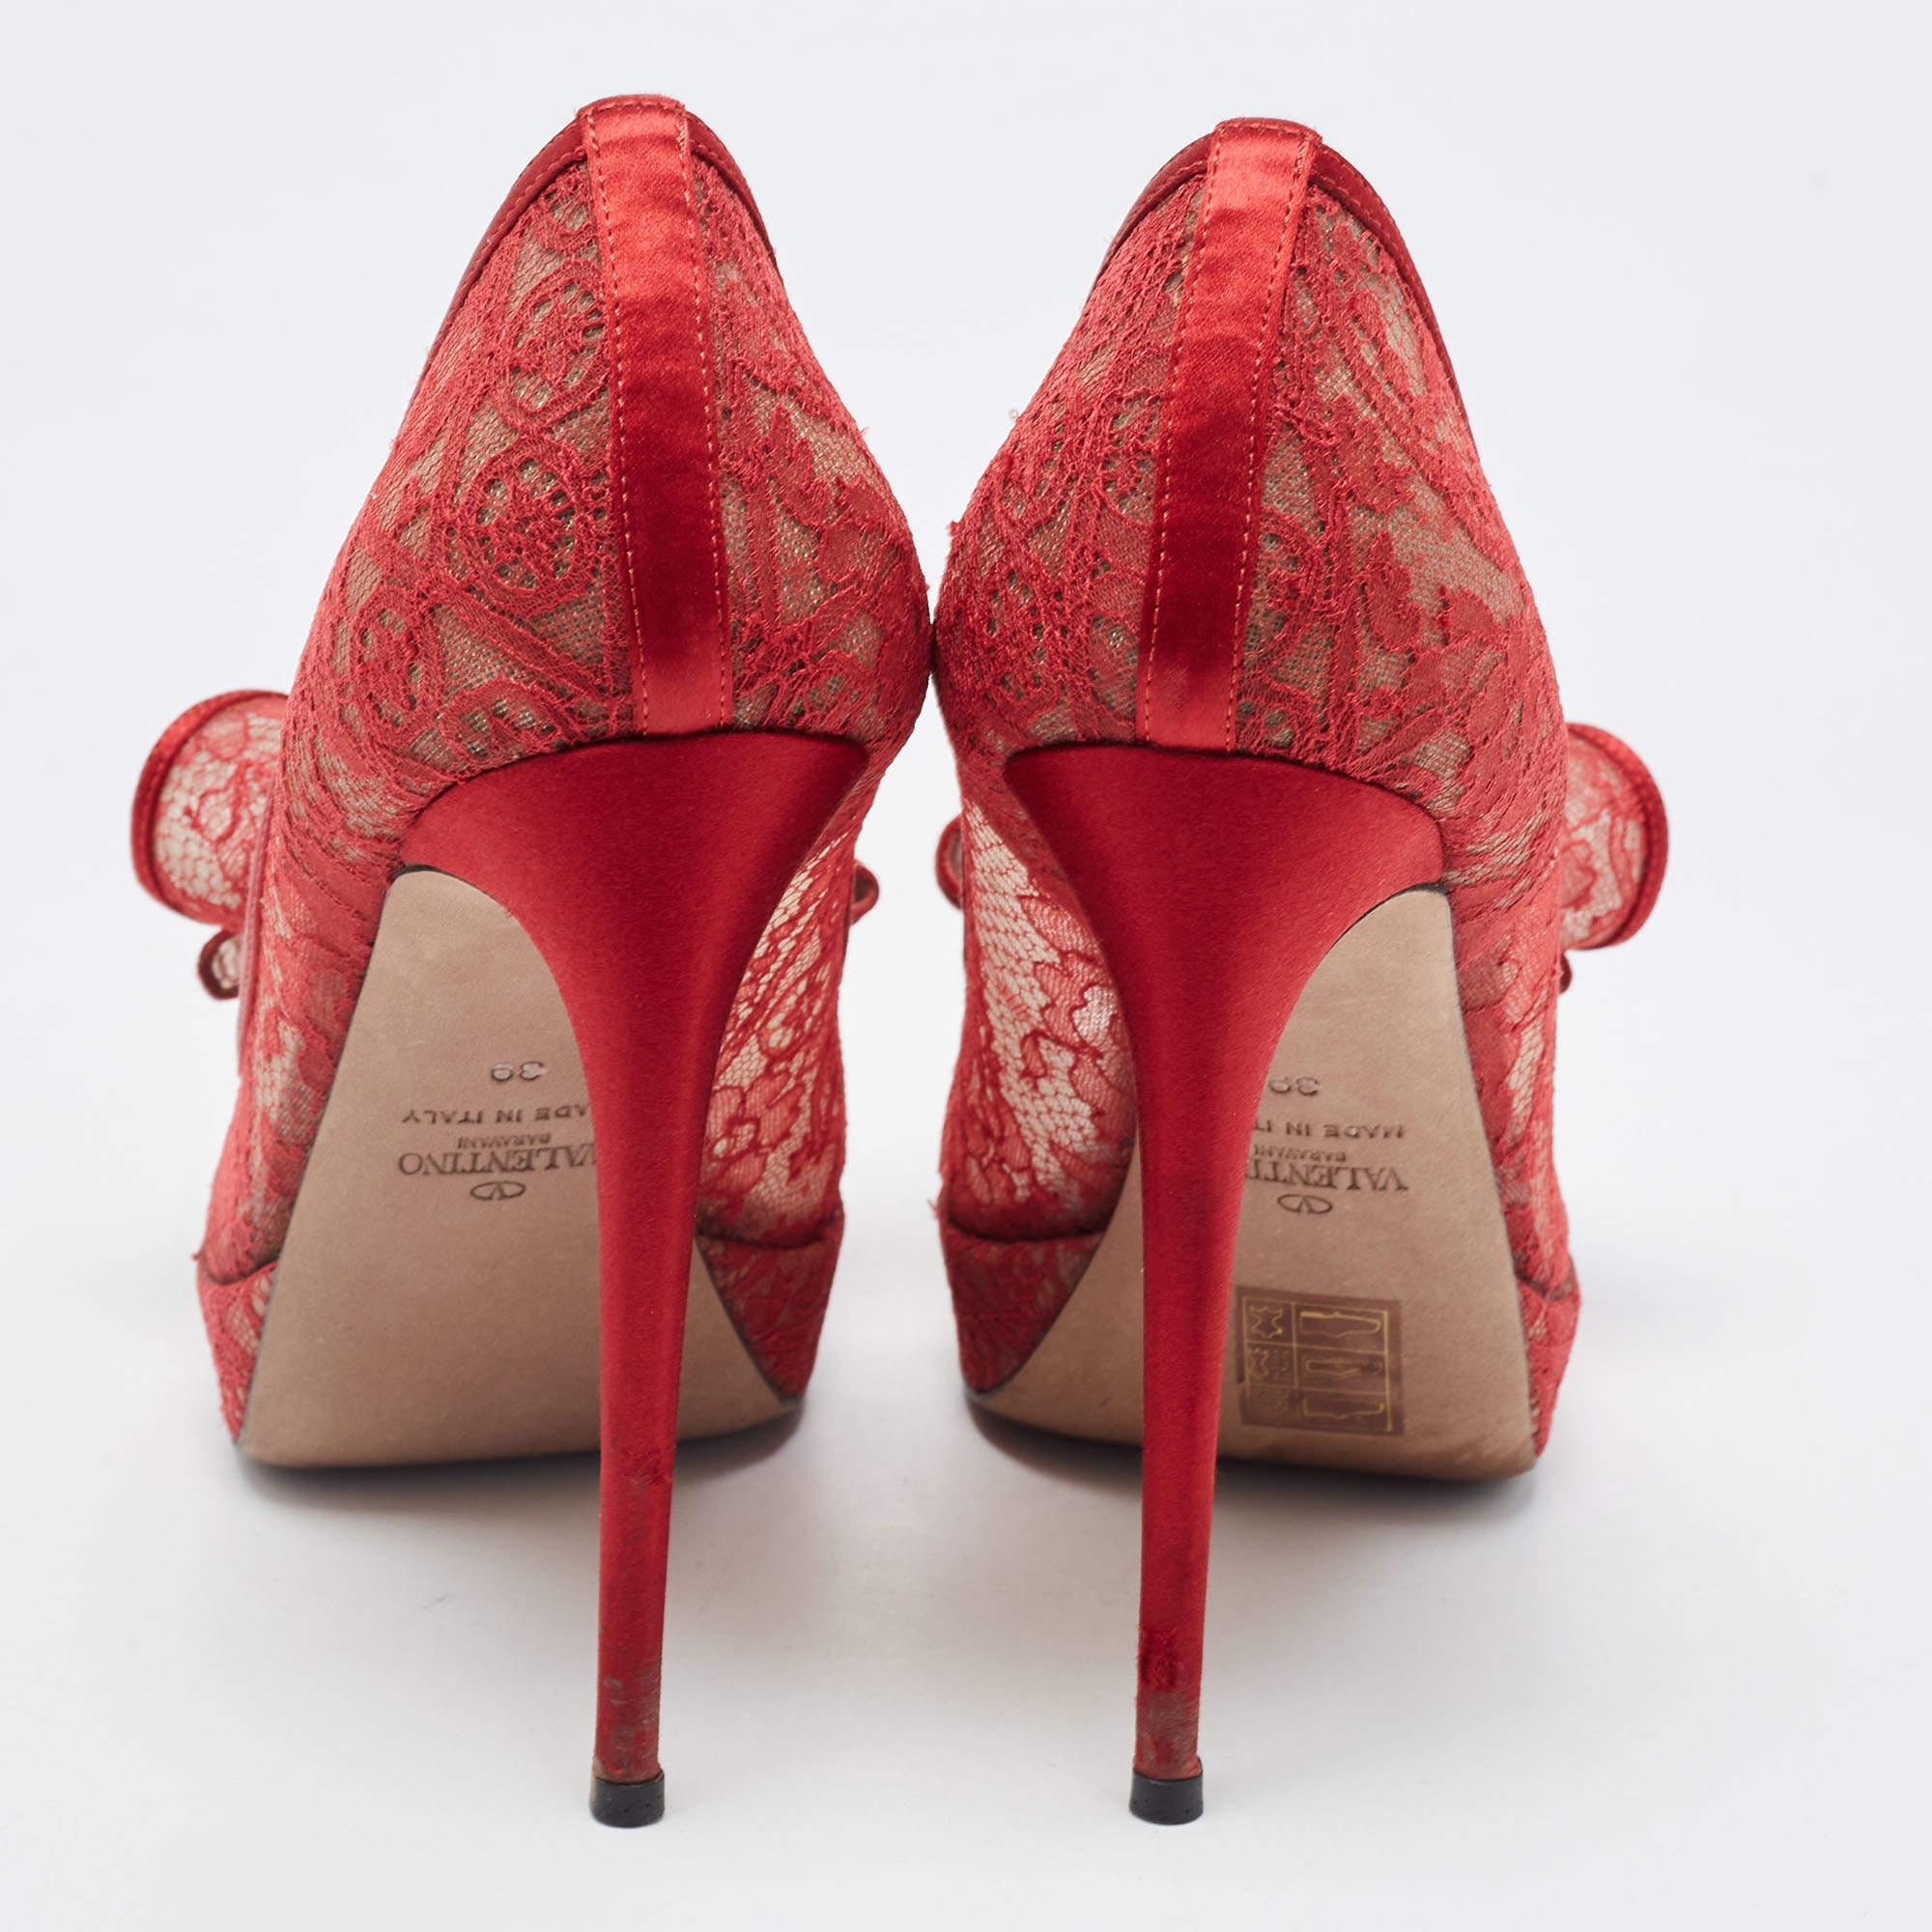 Valentino Red Satin and Lace Platform Peep Toe Pumps Size 39 2